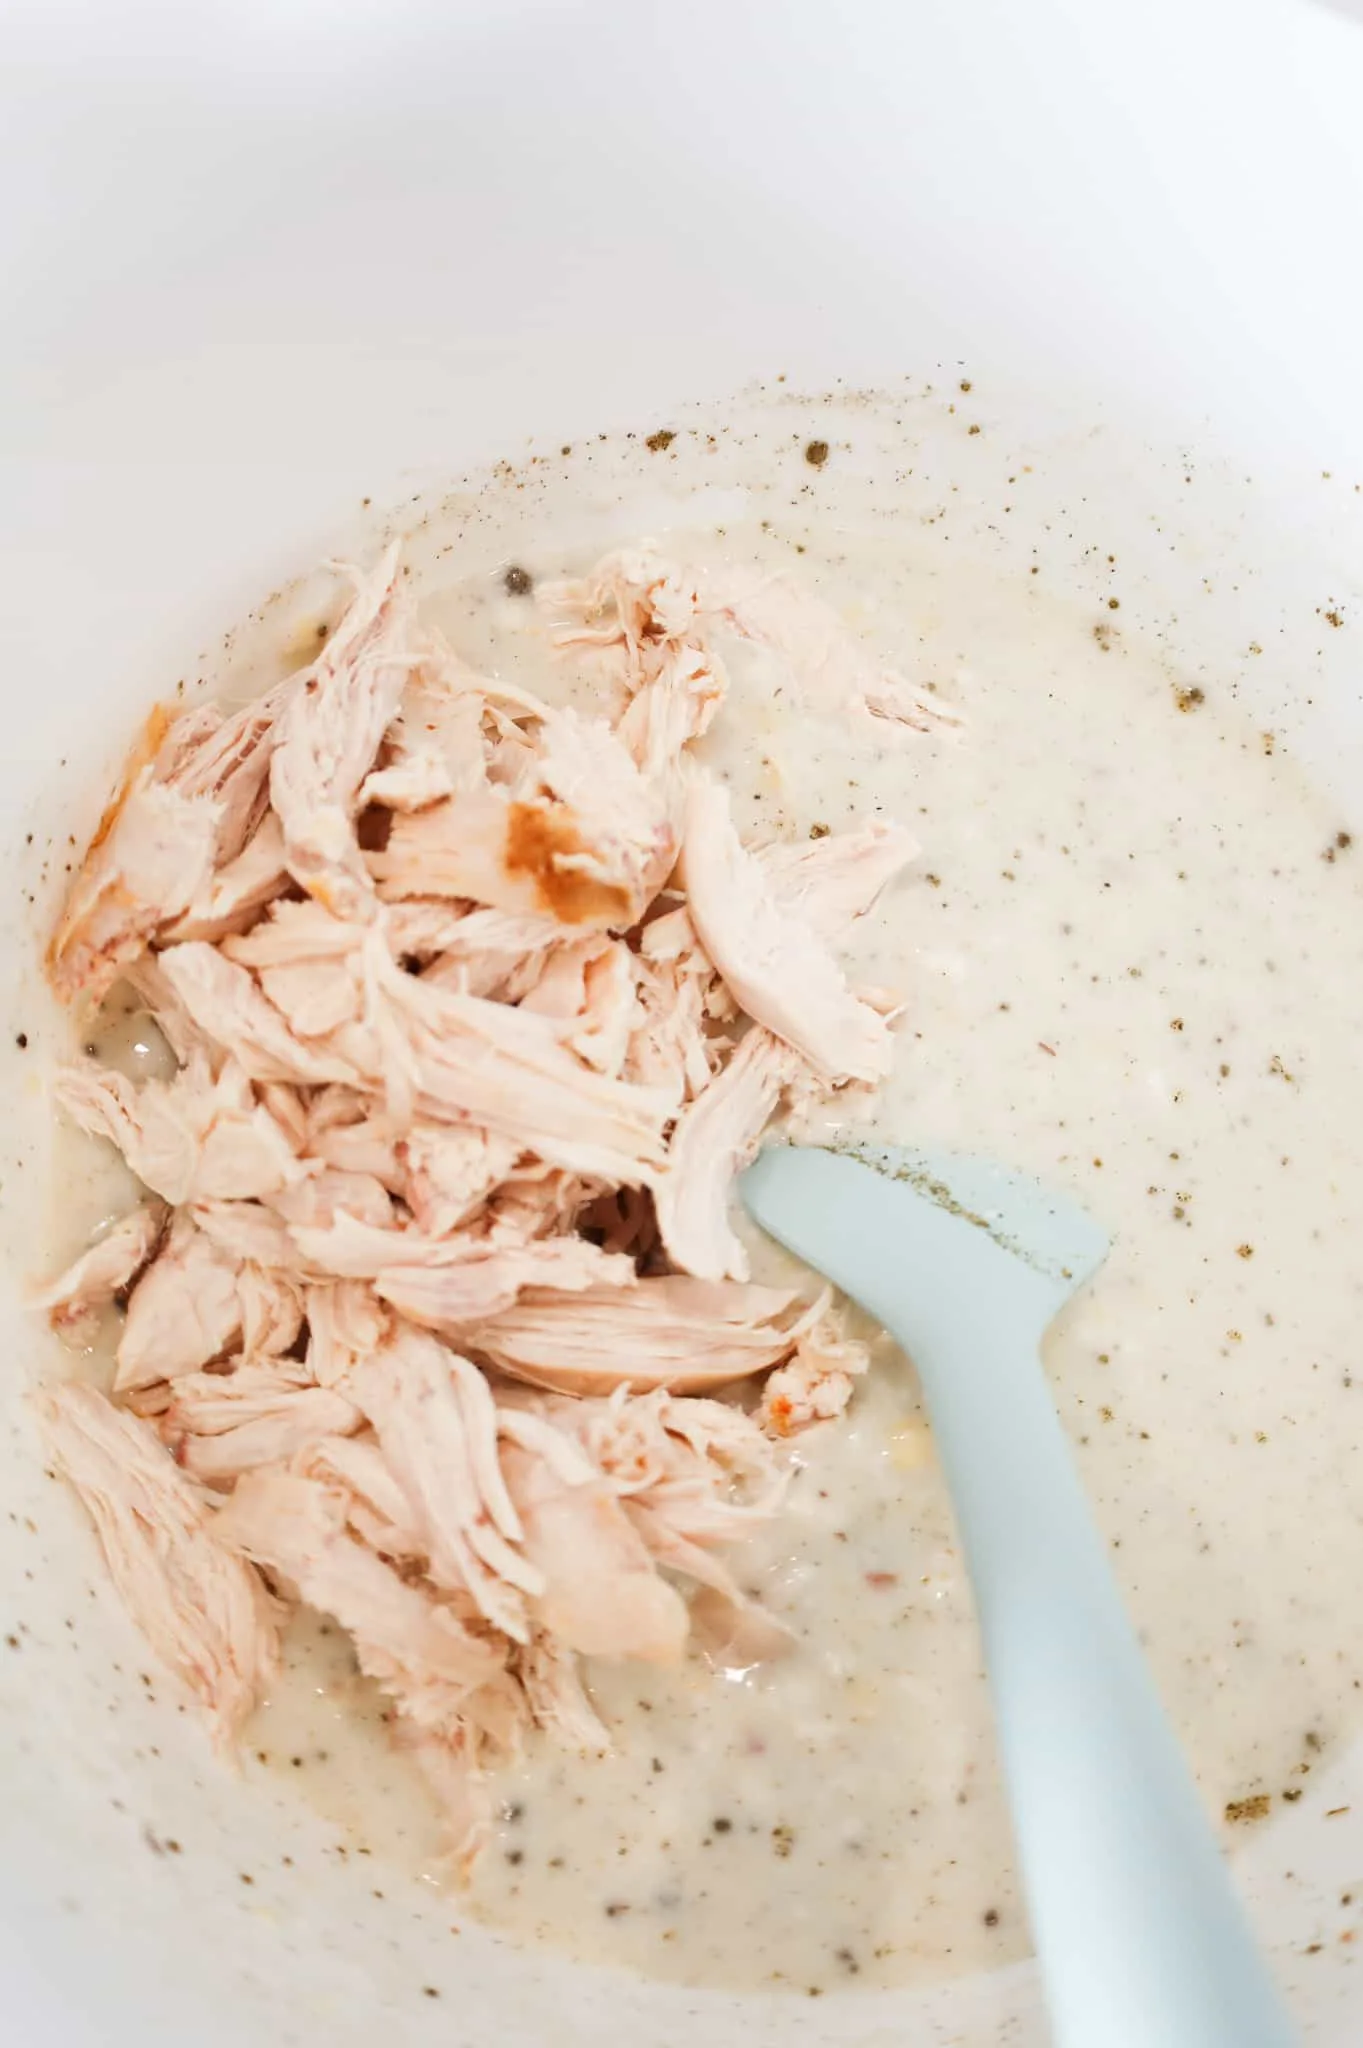 shredded chicken added to mixing bowl on top of cream soup mixture